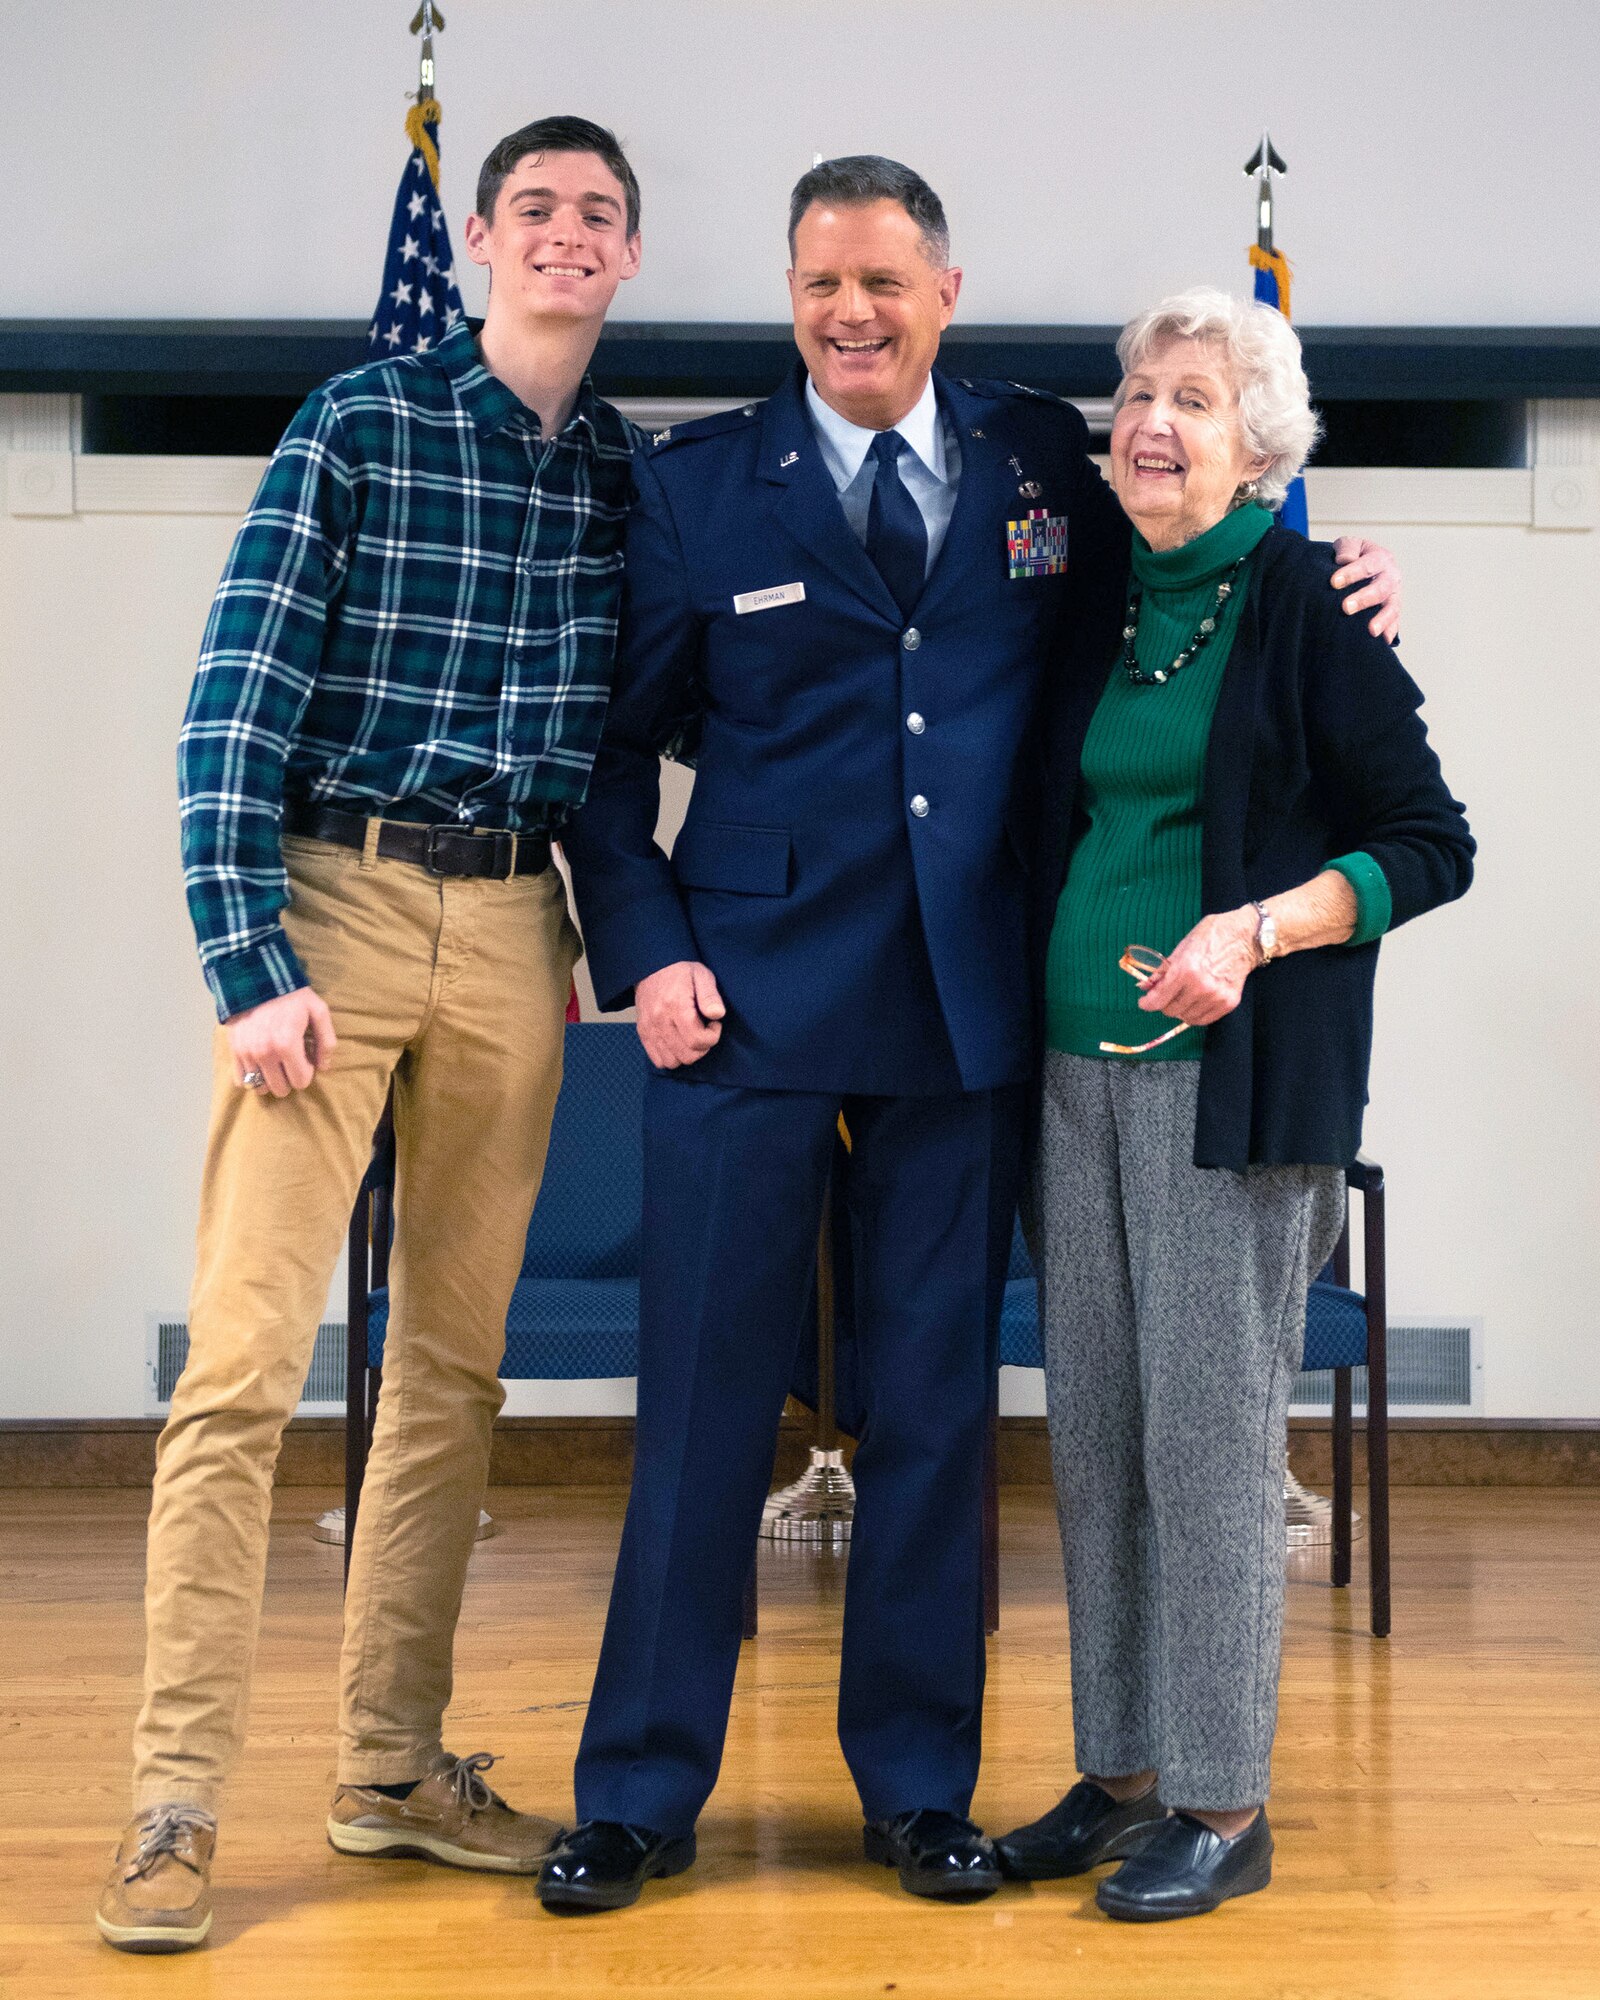 Chaplain Fred Ehrman is promoted to the rank of colonel with the help of family members during a ceremony at the Kentucky Air National Guard Base in Louisville, Ky., Jan. 5, 2019. Ehrman, who previously served as chaplain at the Kentucky Air Guard's 123rd Airlift Wing, is now Air National Guard assistant to the chaplain, U.S. Air Forces Europe and Air Forces Africa.